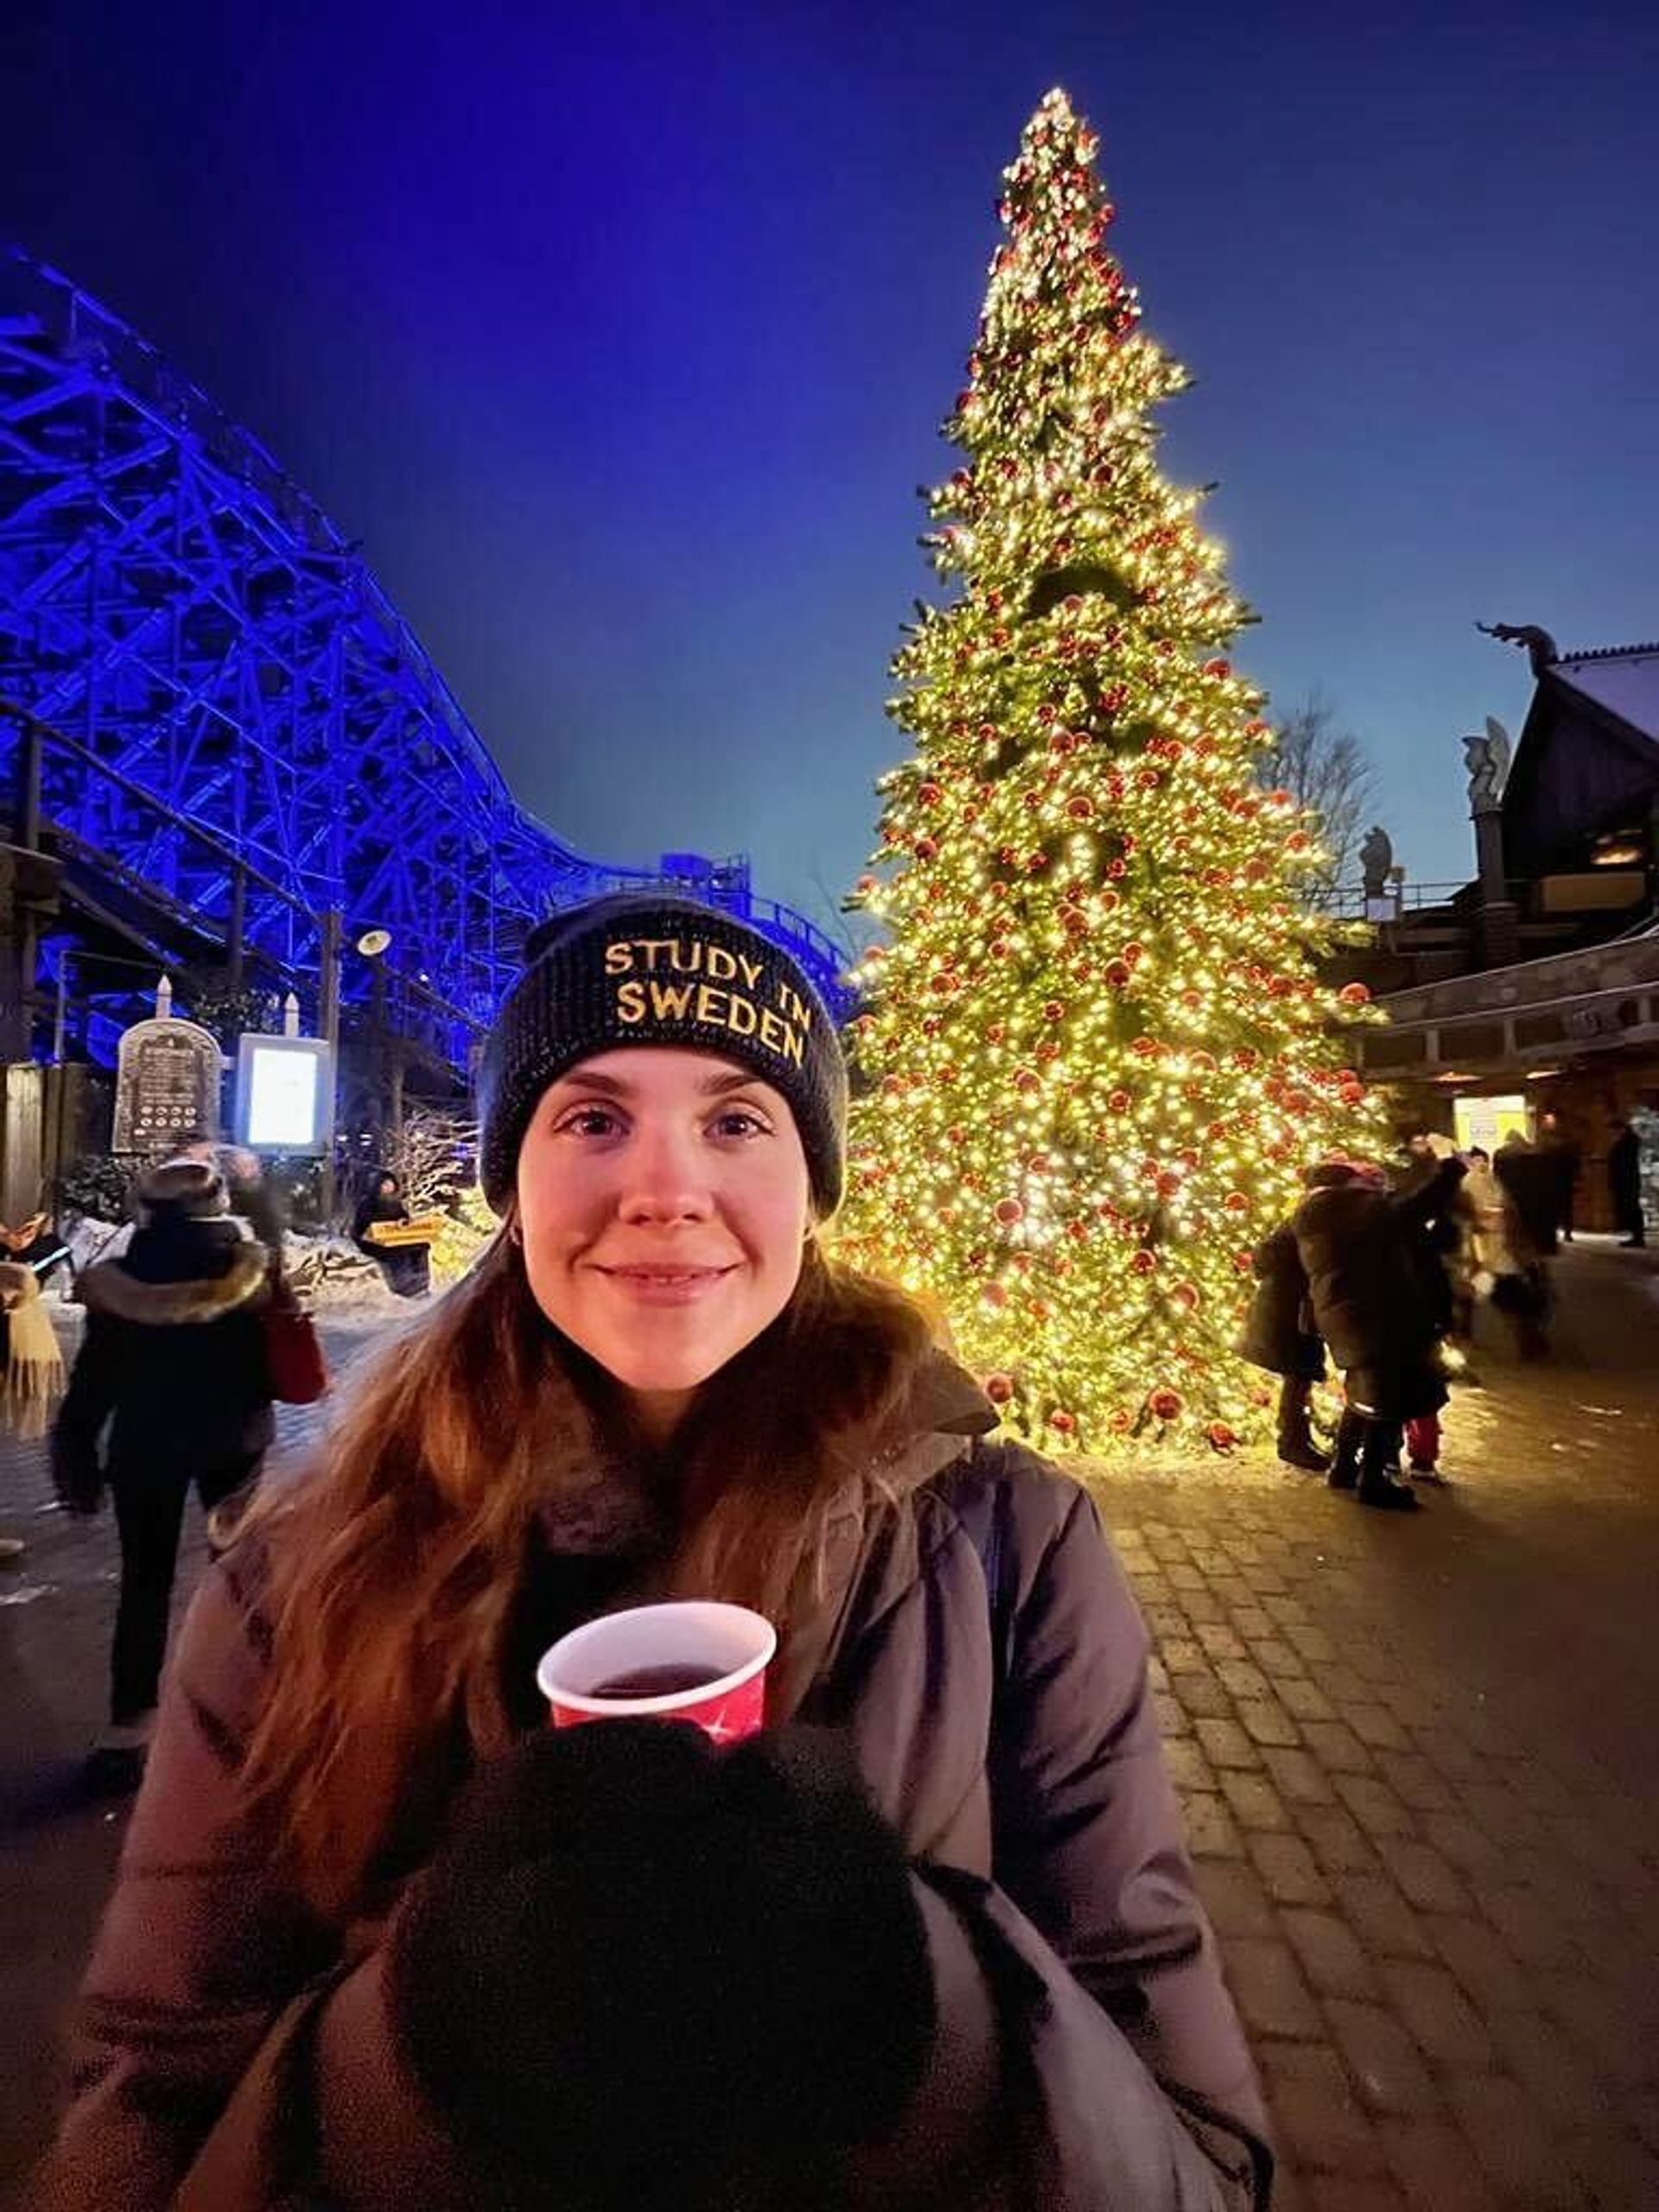 A girl posing in front of Christmas tree holding a cup in hands.